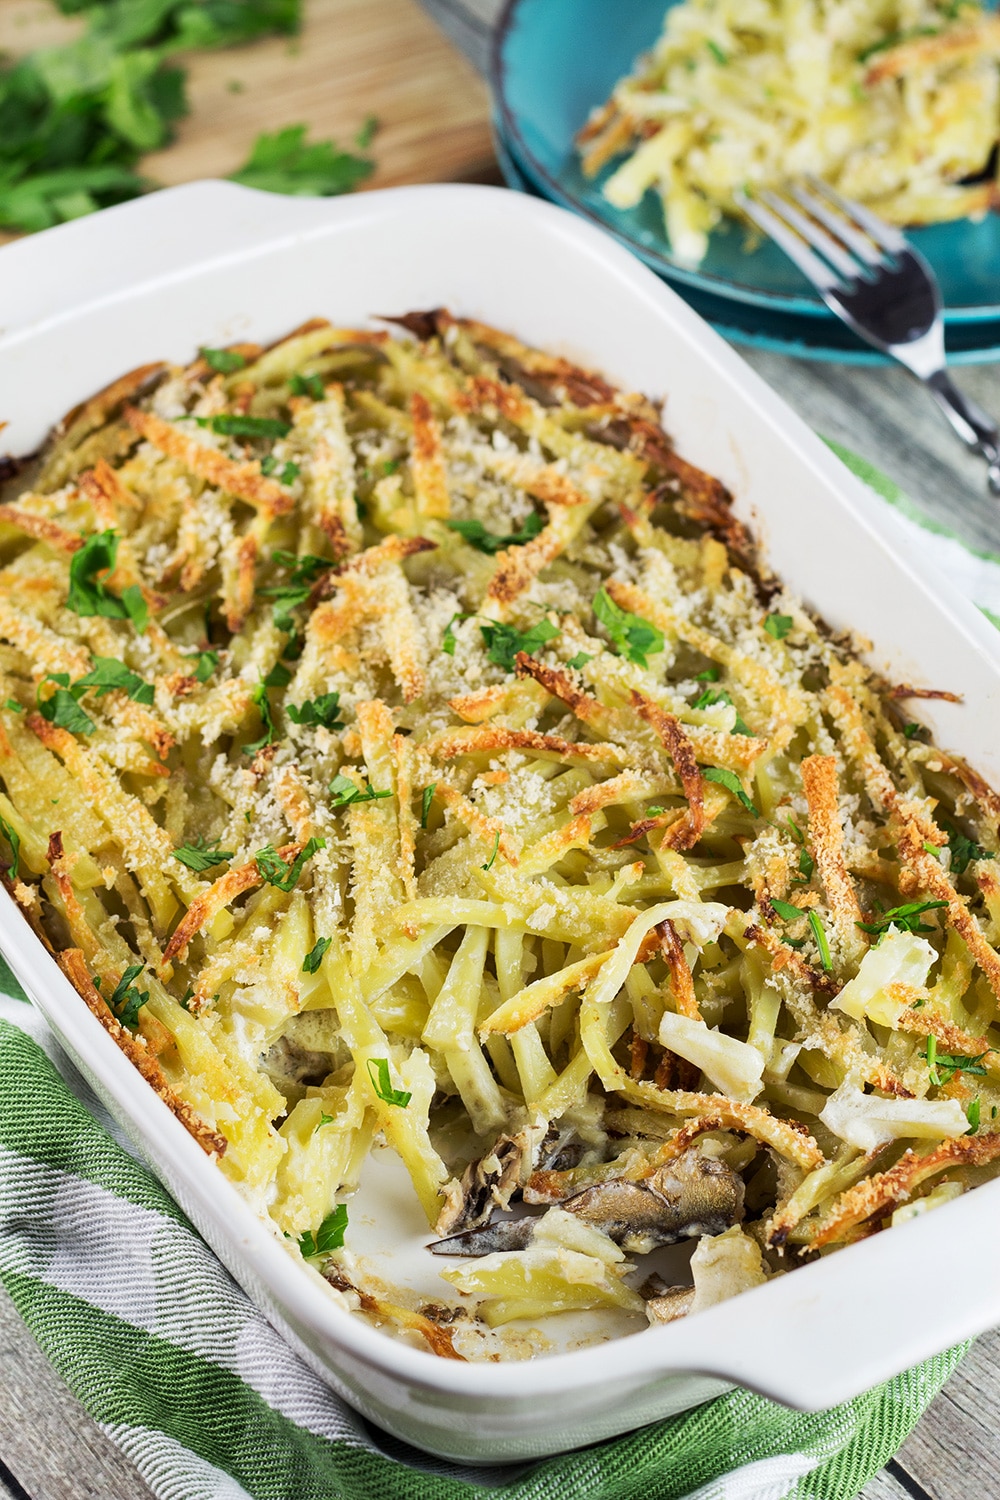 Janssons Frestelse or Jansson's Temptation is a classic Swedish potato and sprat casserole traditionally served on Christmas but great any time of the year. Creamy, hearty, filling! | cookingtheglobe.com